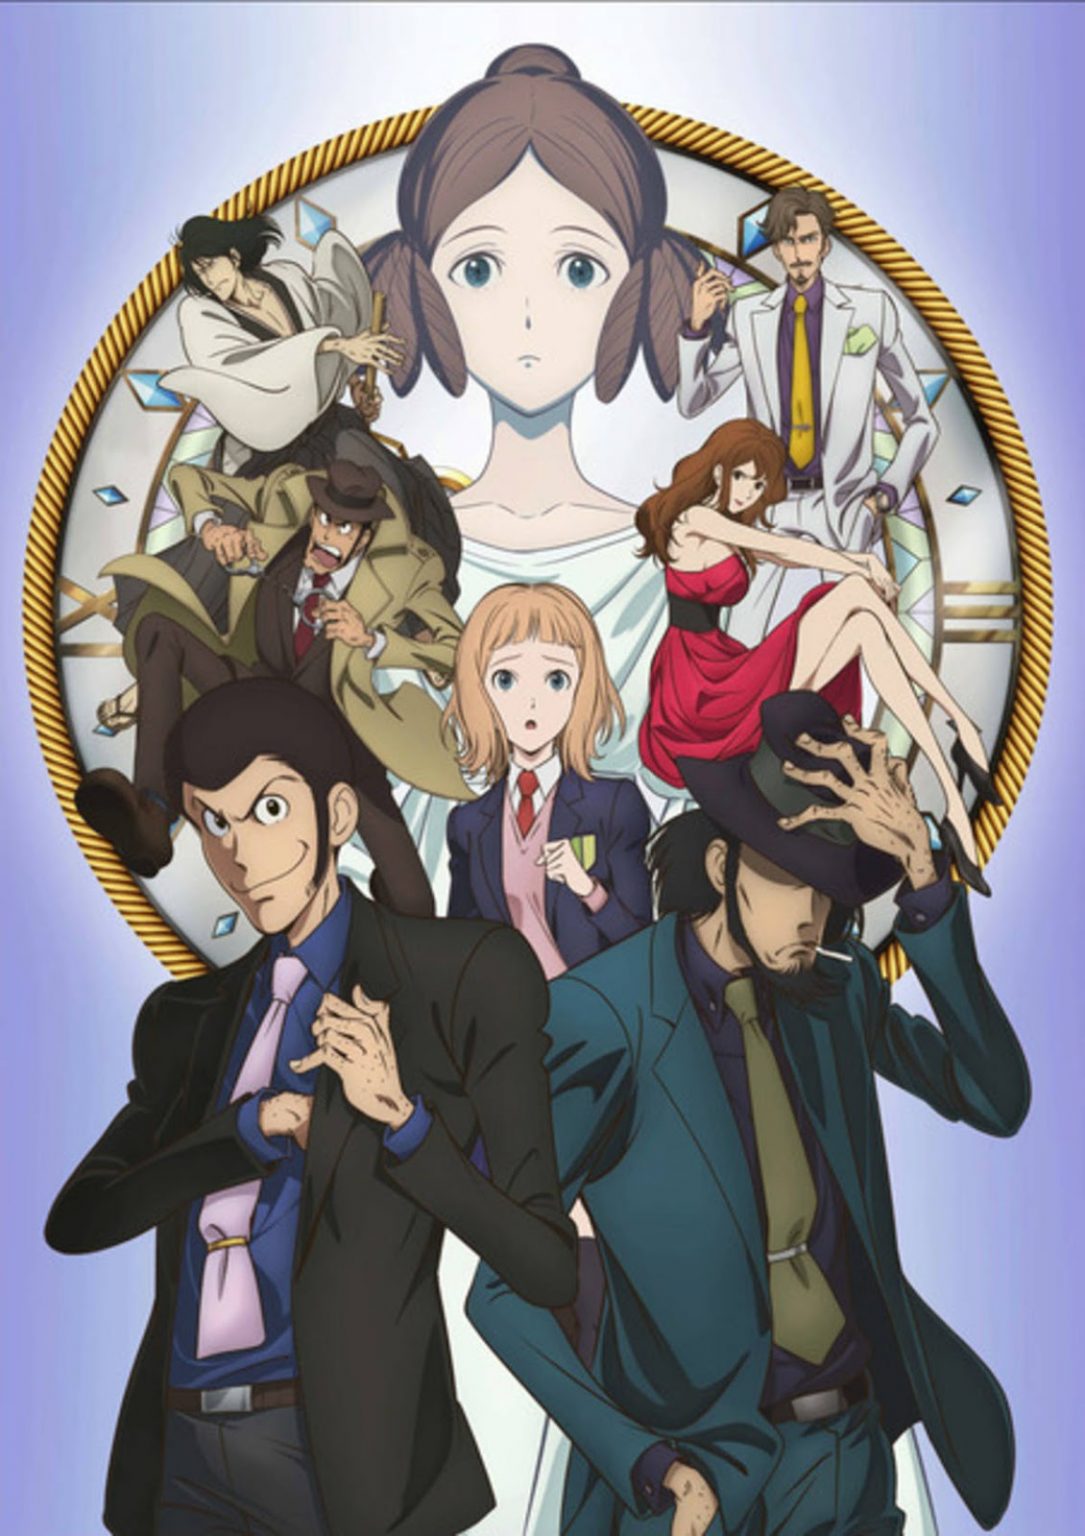 LUPIN THE 3rd: Goodbye Partner Available for Digital Purchase on